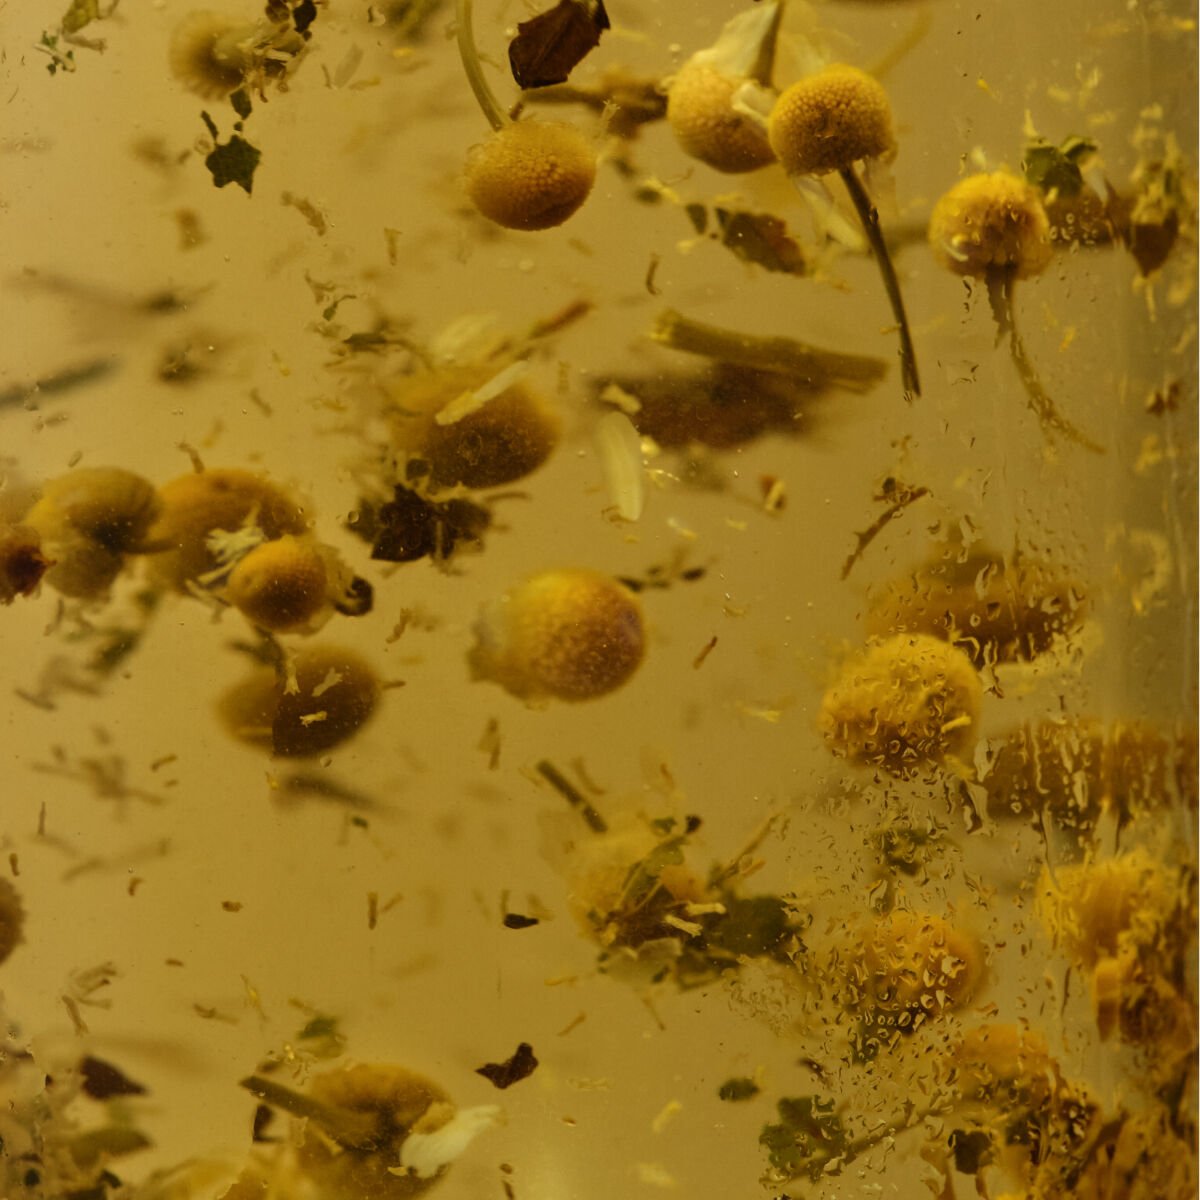 Camomile tea floating in water